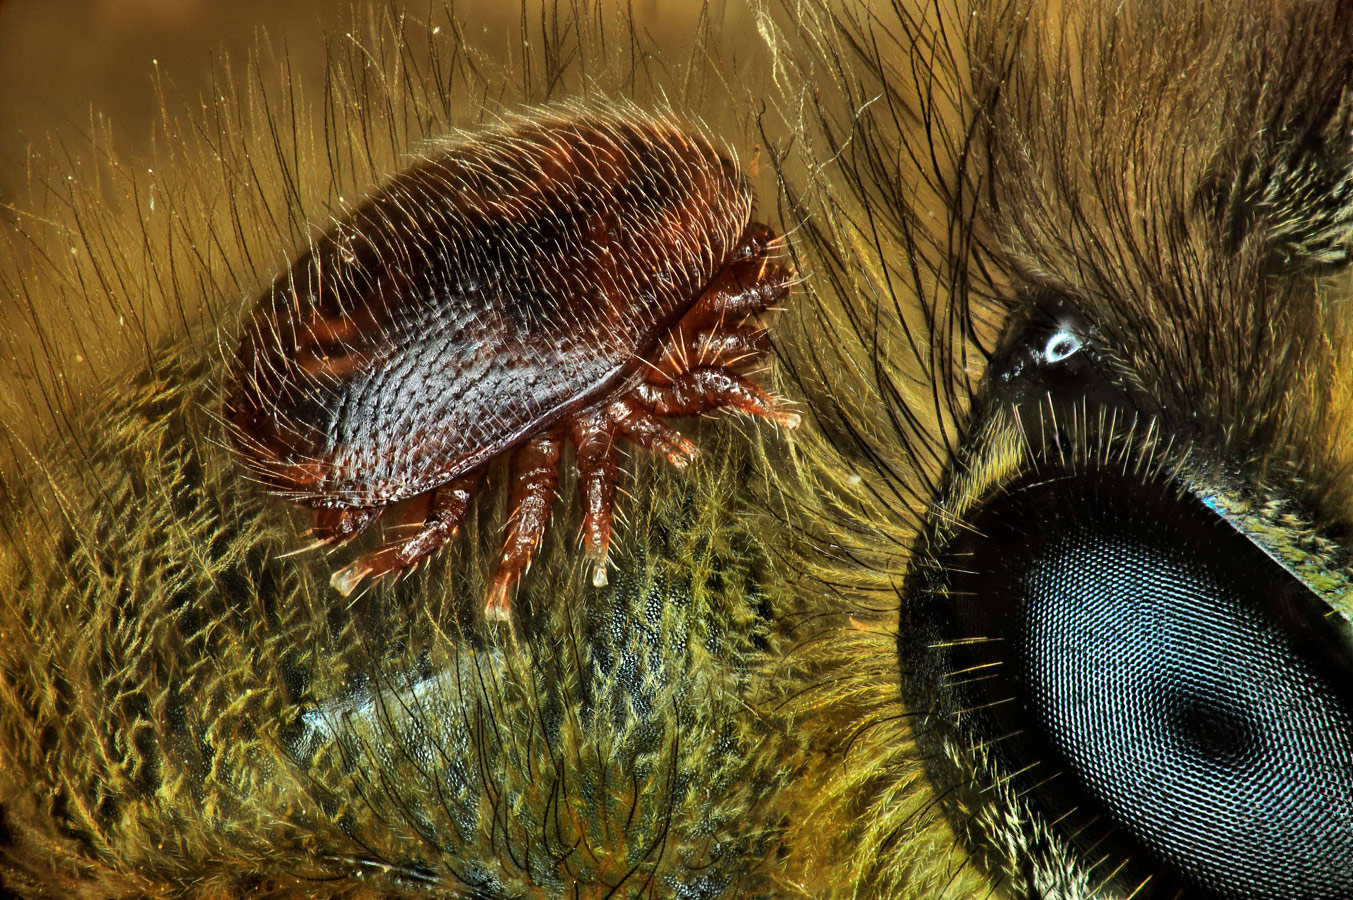 Varroa destructor (mite) on the back of Apis mellifera (honeybee), © Antoine Franck, CIRAD - Agricultural Research for Development, Saint Pierre, Réunion Island, France, 15th Place, Nikon’s Small World - Photomicrography Competition